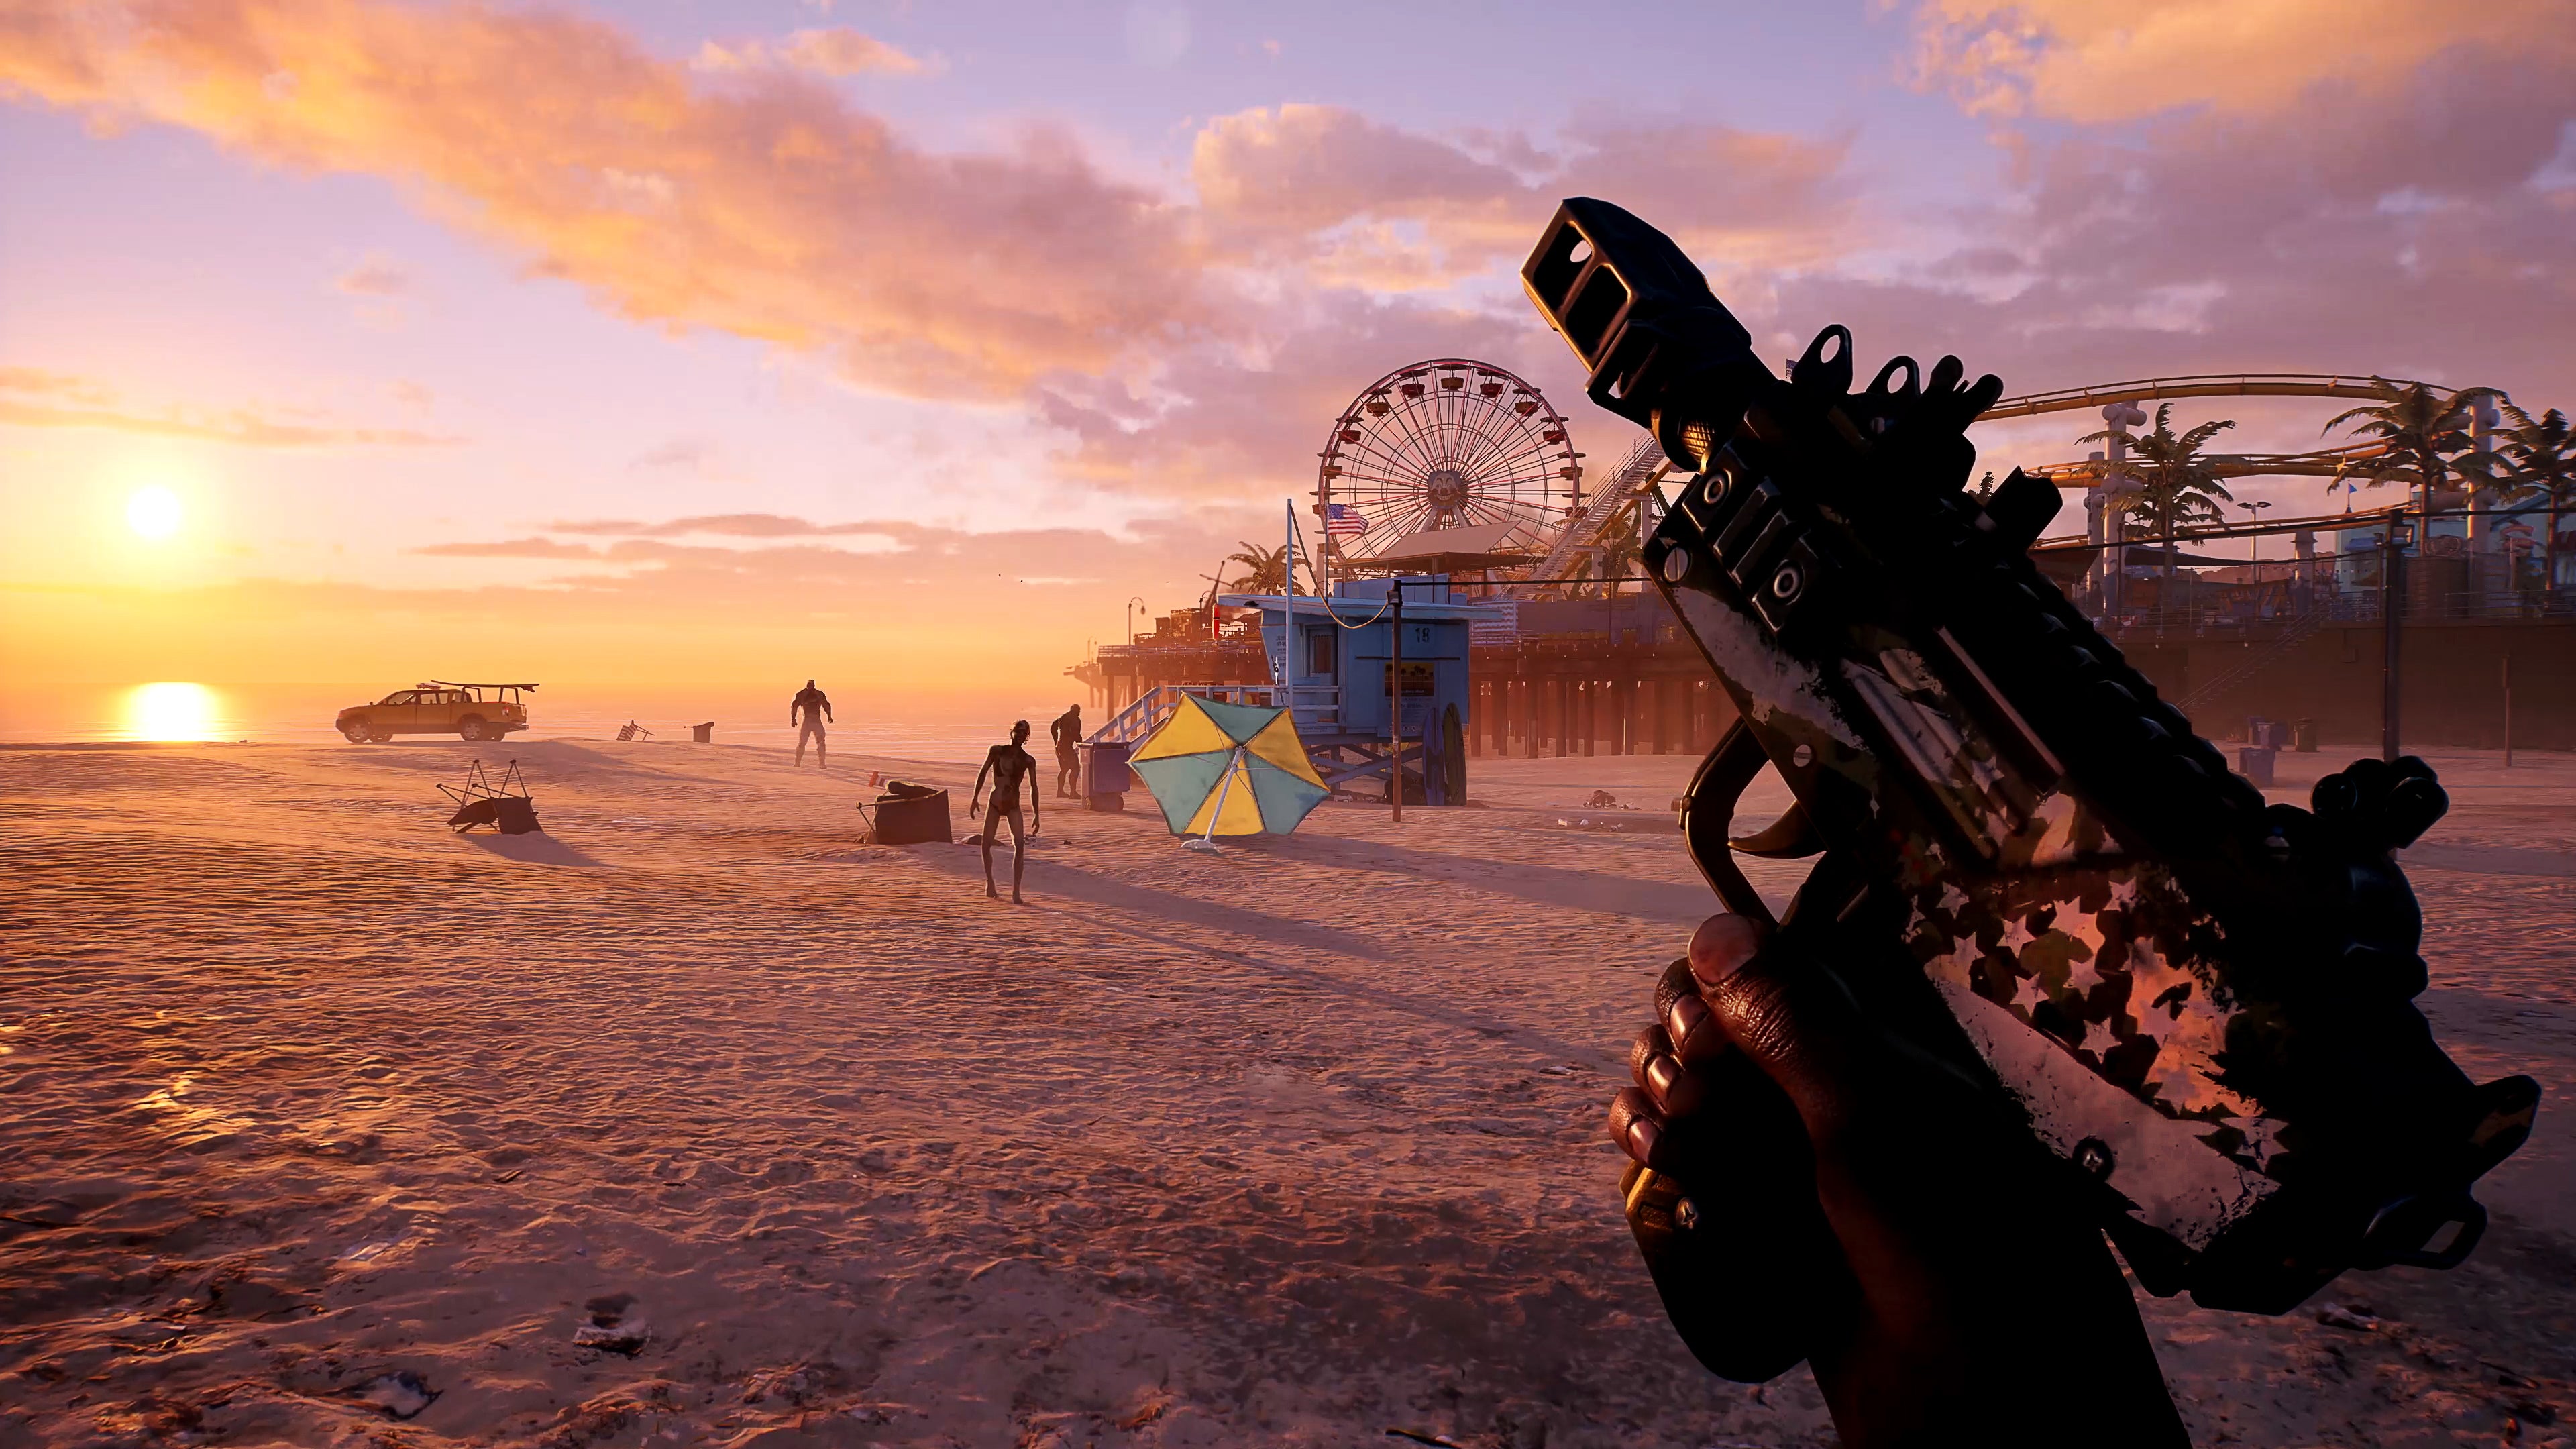 Running along the beach in Dead Island 2, holding a machine gun to shoot zombies with